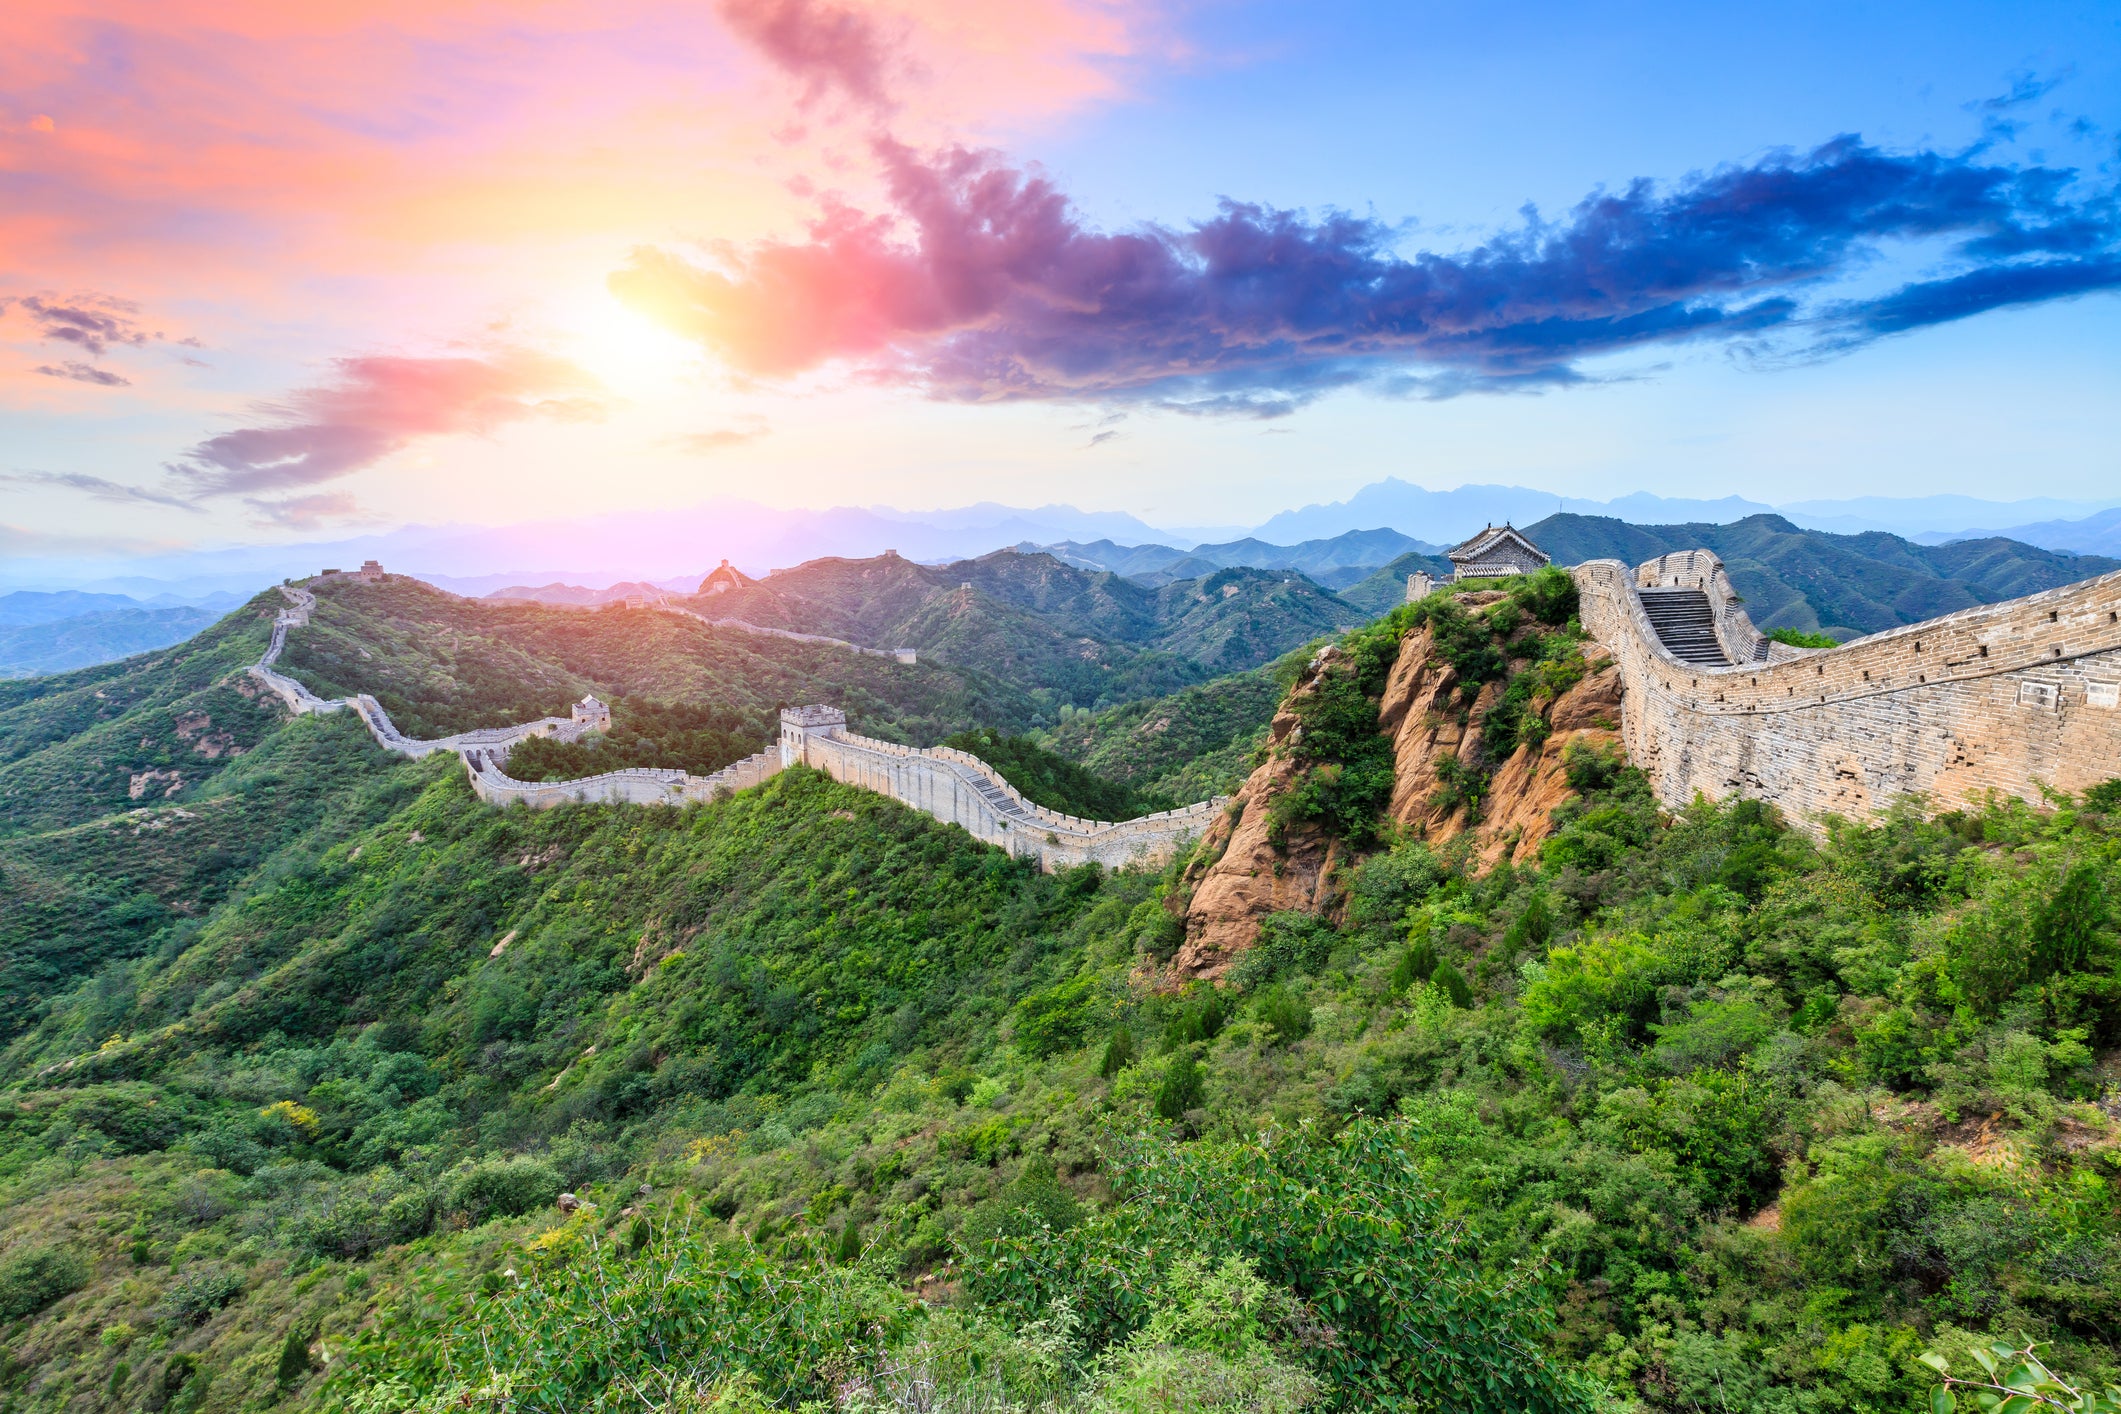 The Jinshanling section of the Great Wall of China, which was voted one of the seven new wonders of the world